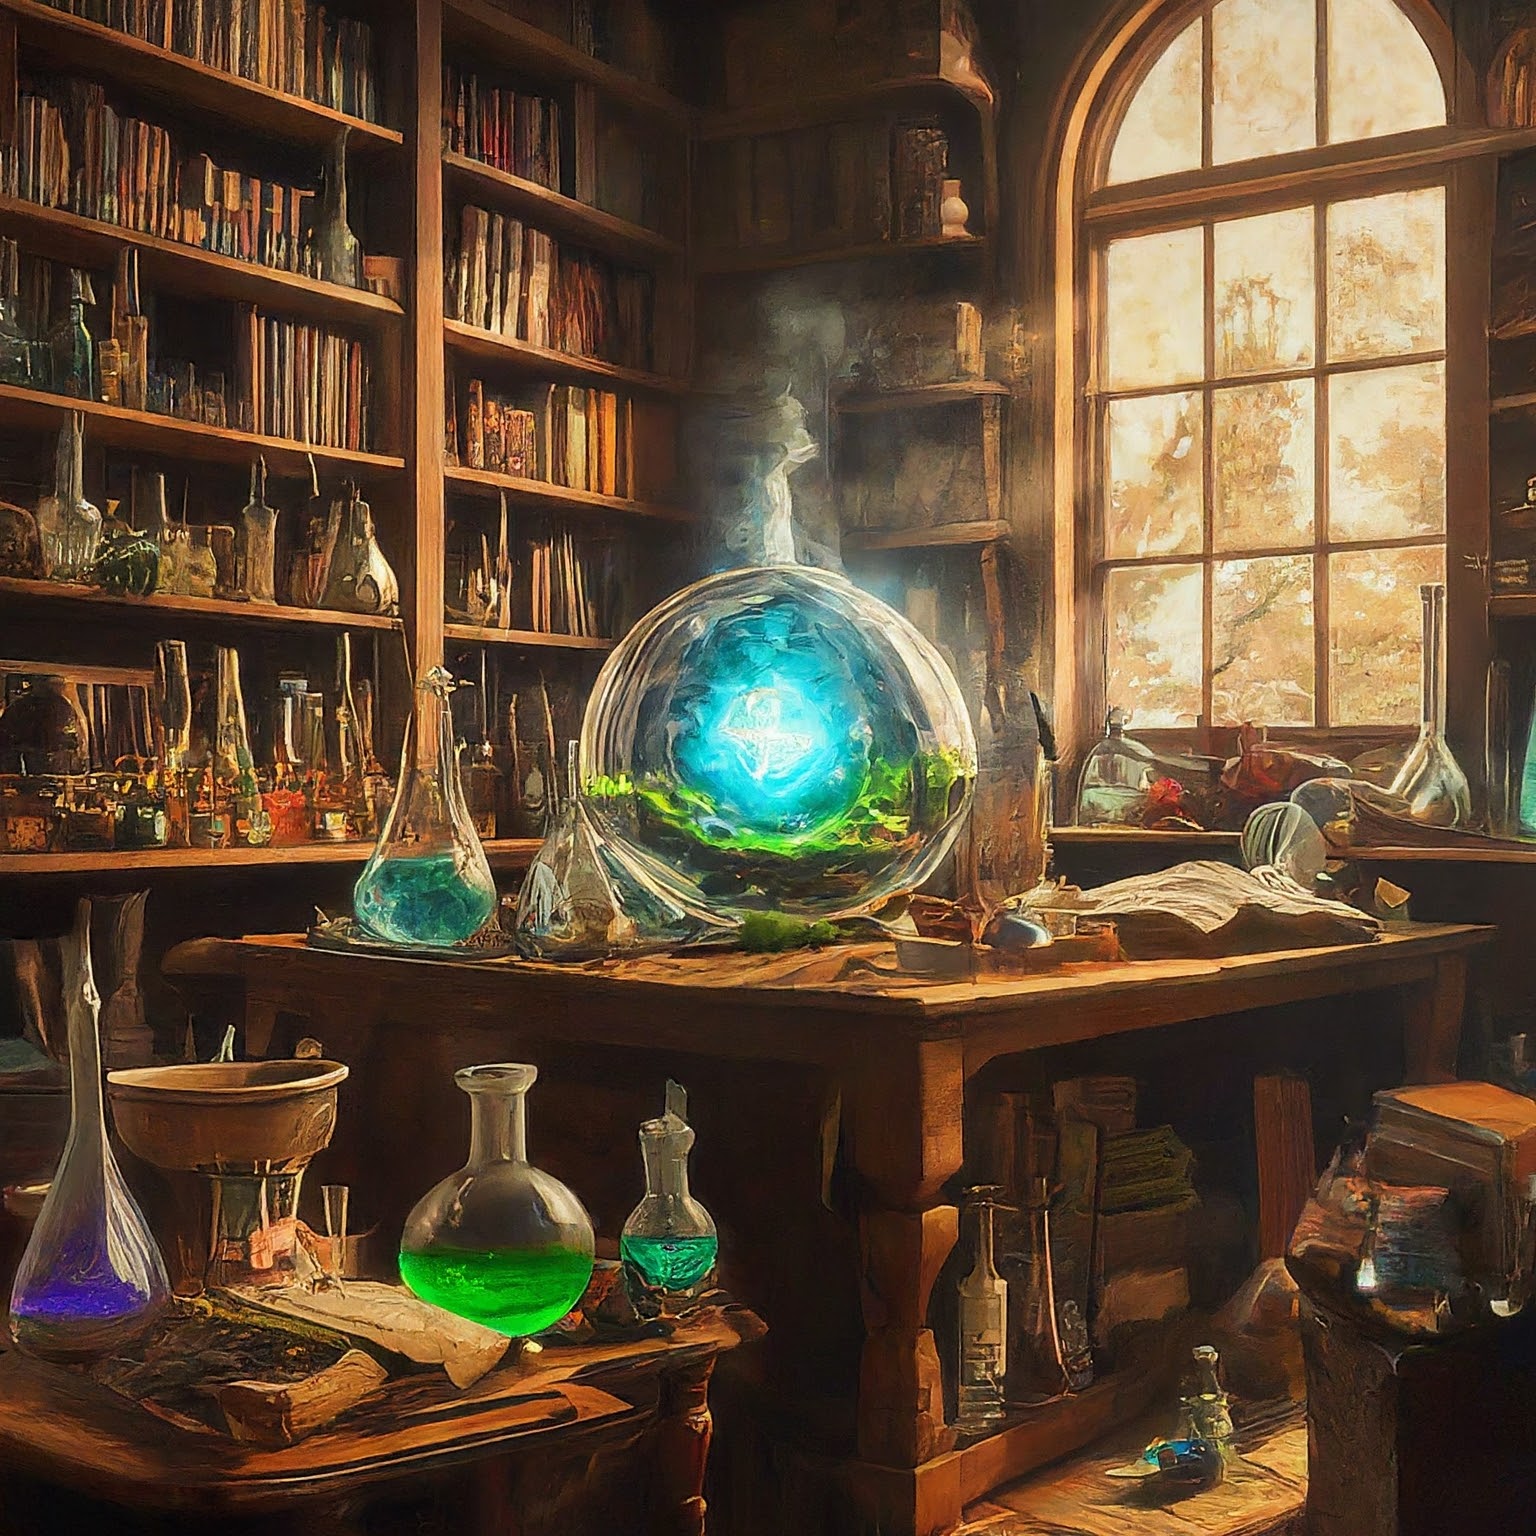 An image of a chemistry lab with colorful flasks around the table, a bookshelf in the background and light peeking through a window